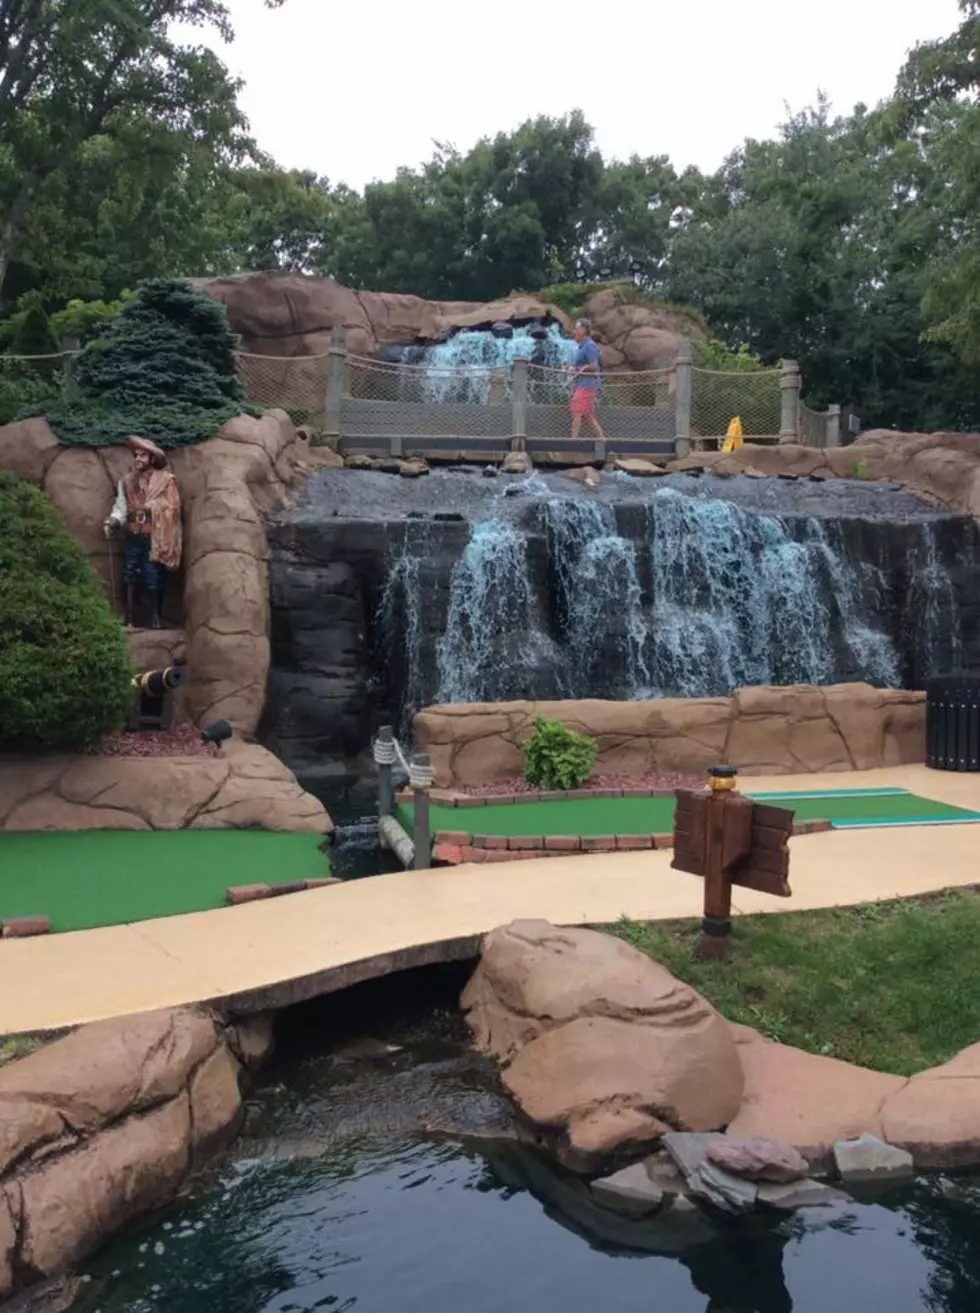 This is the Best Miniature Golf Course in Massachusetts (photos)